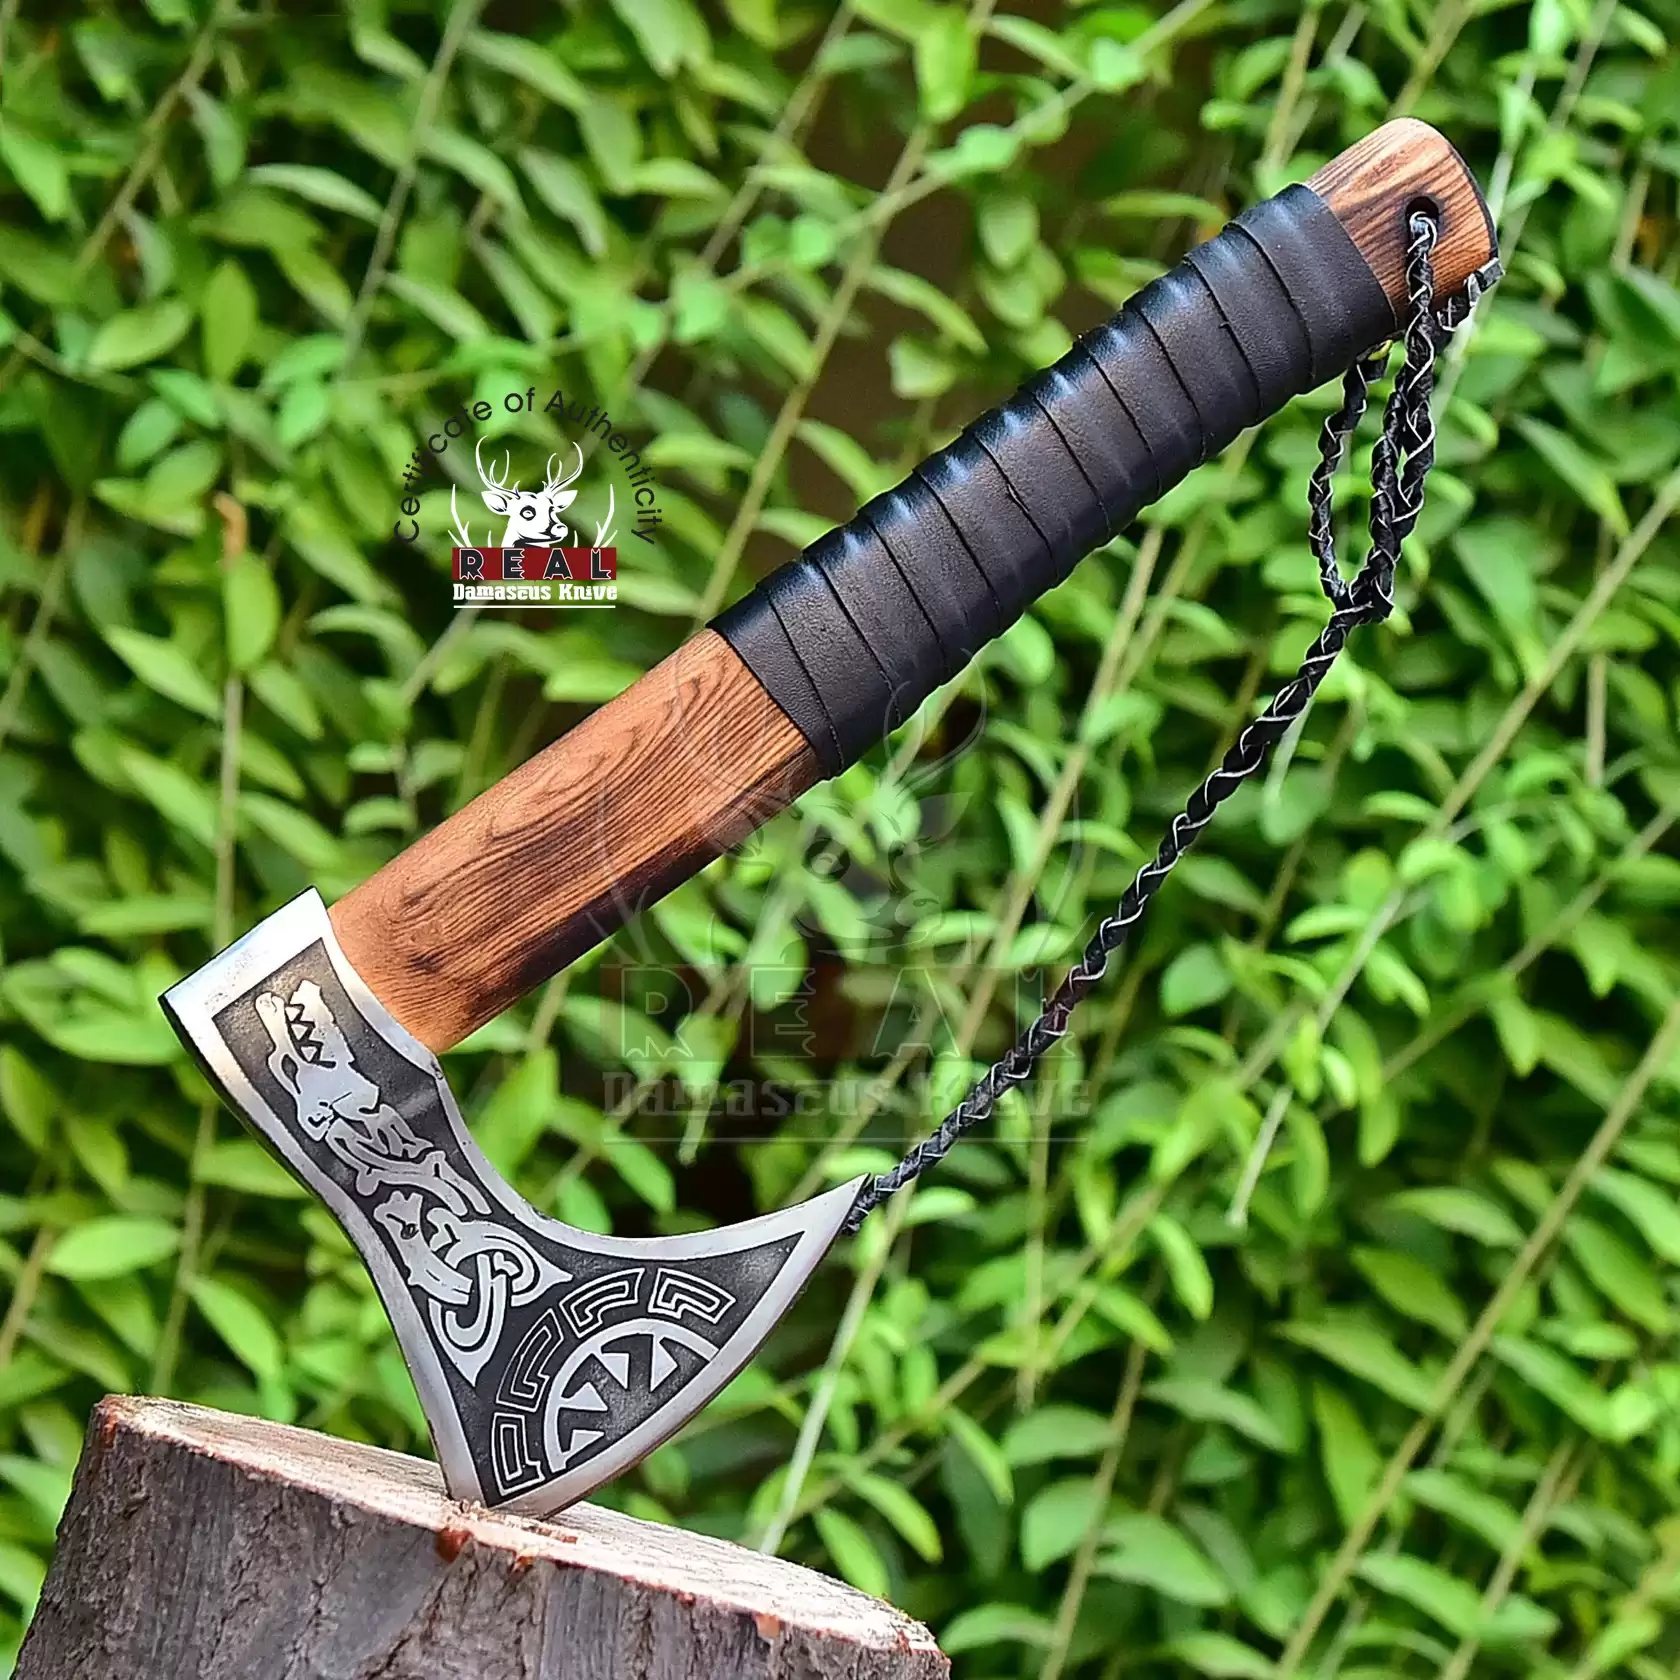 https://www.realdamascusknive.com/image/cache/cache/1001-2000/1553/main/0a9b-custom-gift-forged-carbon-steel-viking-axe-hatchet-rose-wood-throwing-axes-viking-bearded-camping-axe-0-1-1680x1680.webp